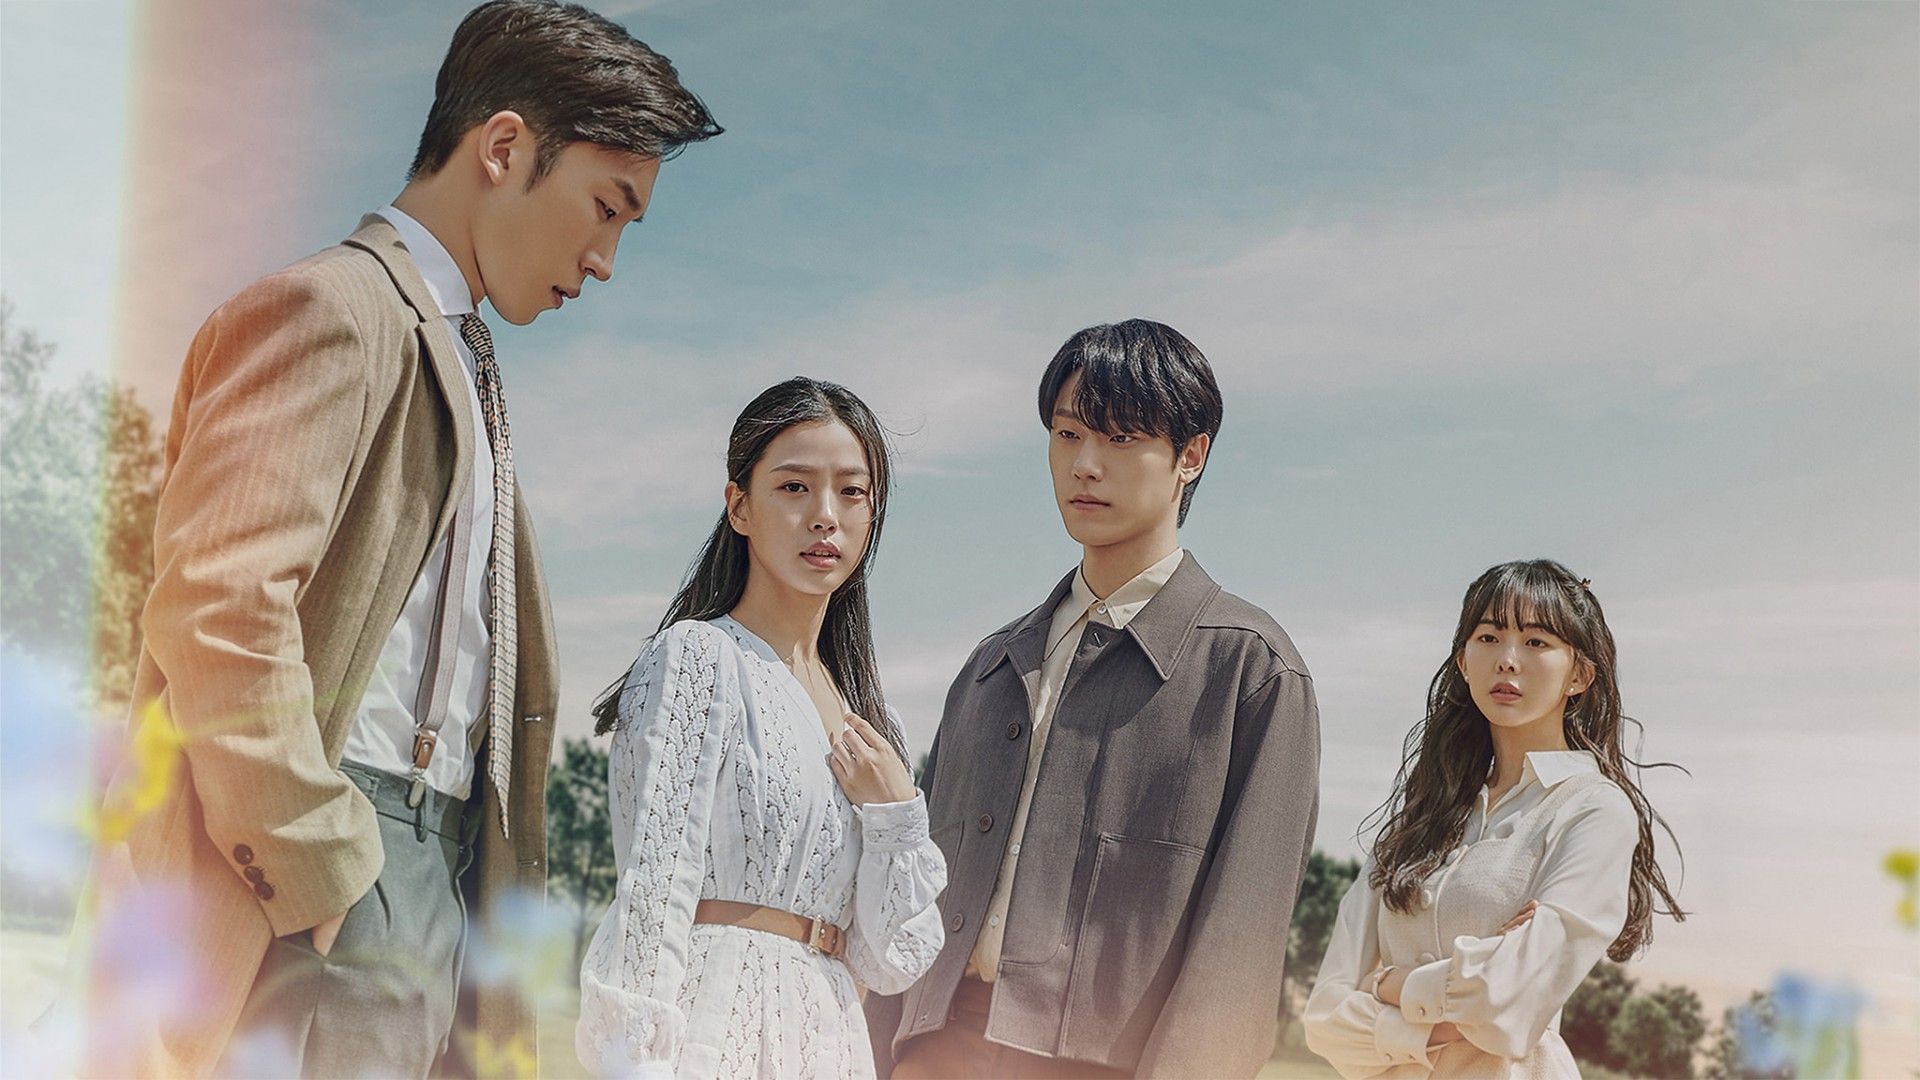 youth mof may Youth of May, une romance transpercée par l'histoire